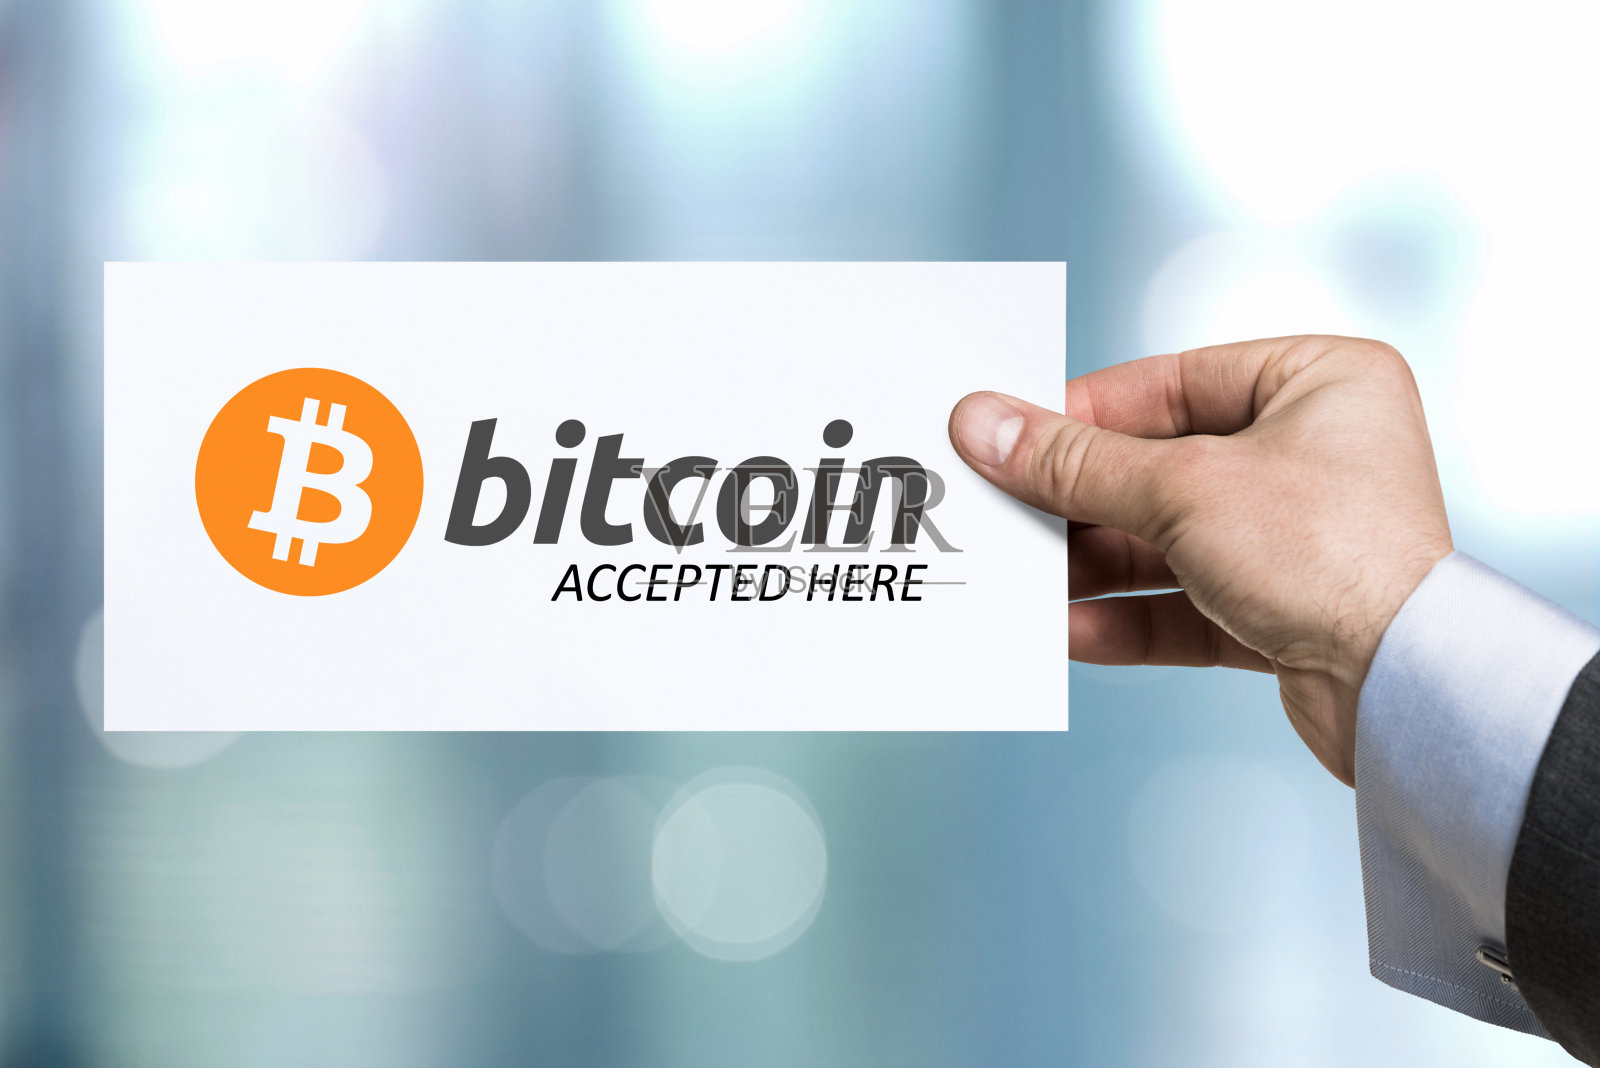 Bitcoin accepted here照片摄影图片